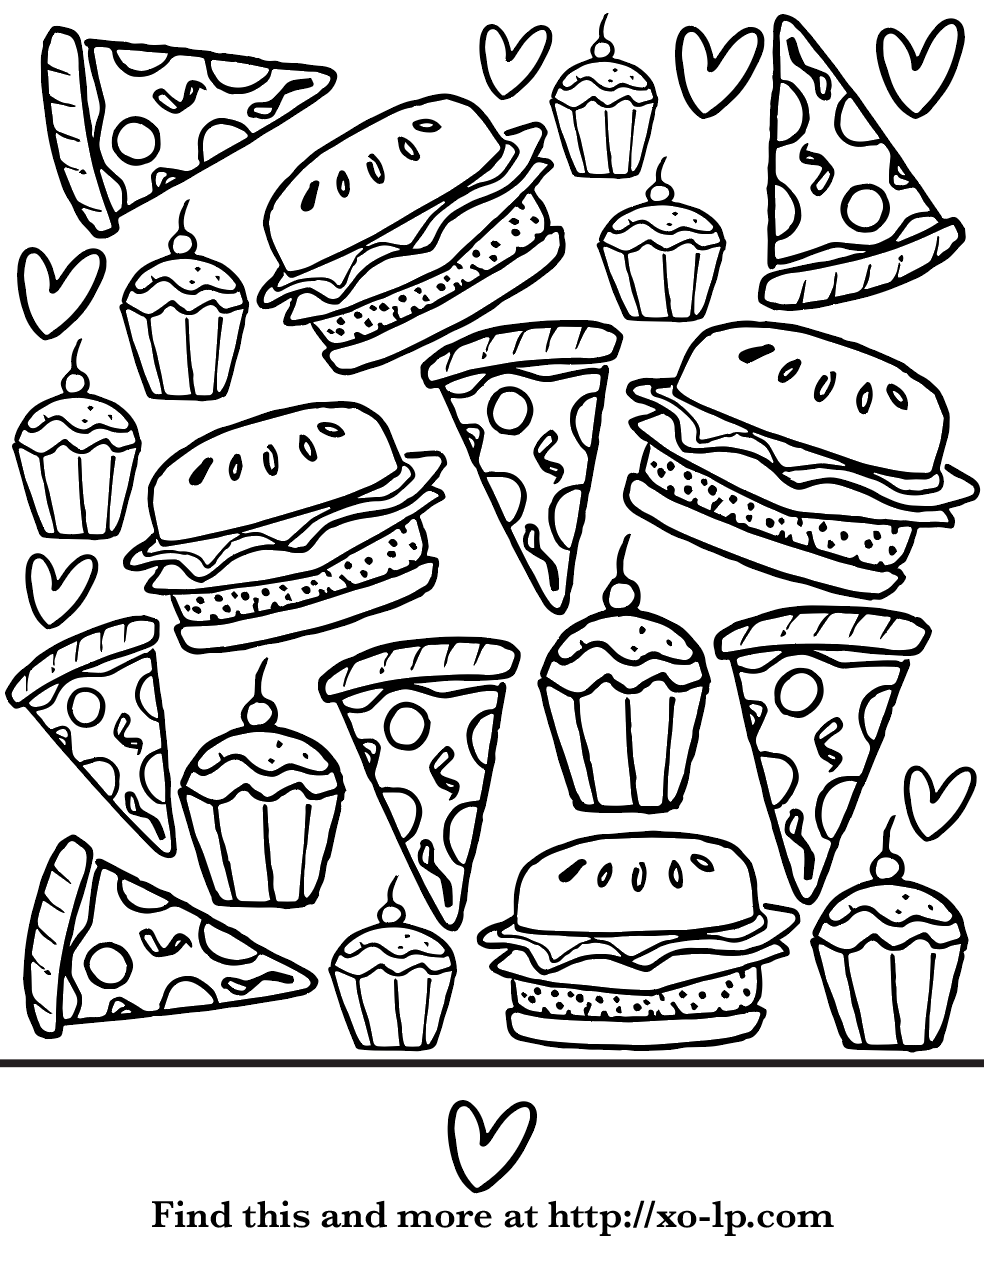 Summer Food Coloring Page Xo Lp